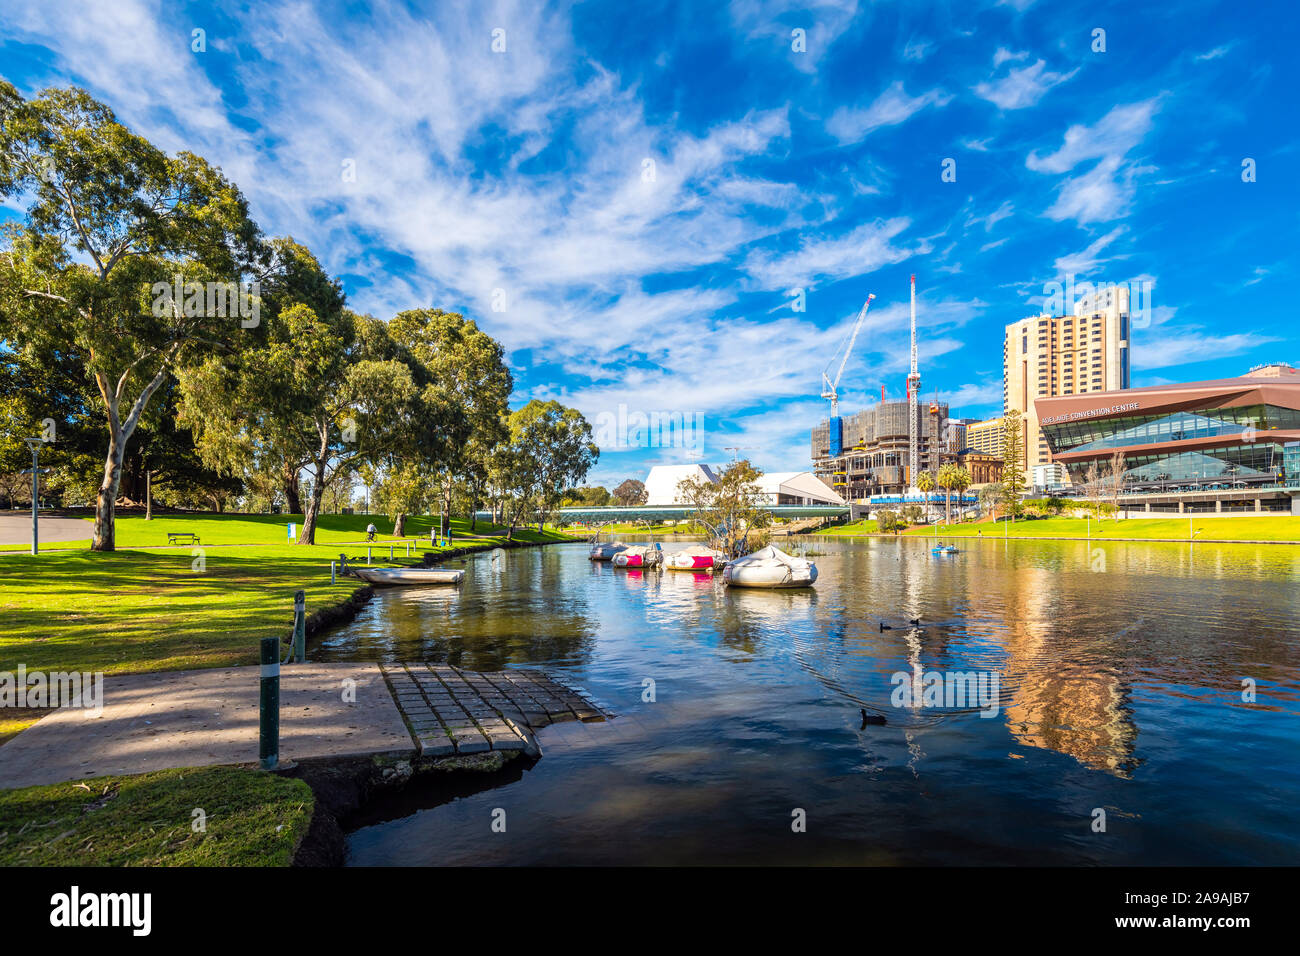 Adelaide, Australia - August 4, 2019: City center skyline view with new SkyCity Casino under construction in the middle viewed across Riverbank on a d Stock Photo